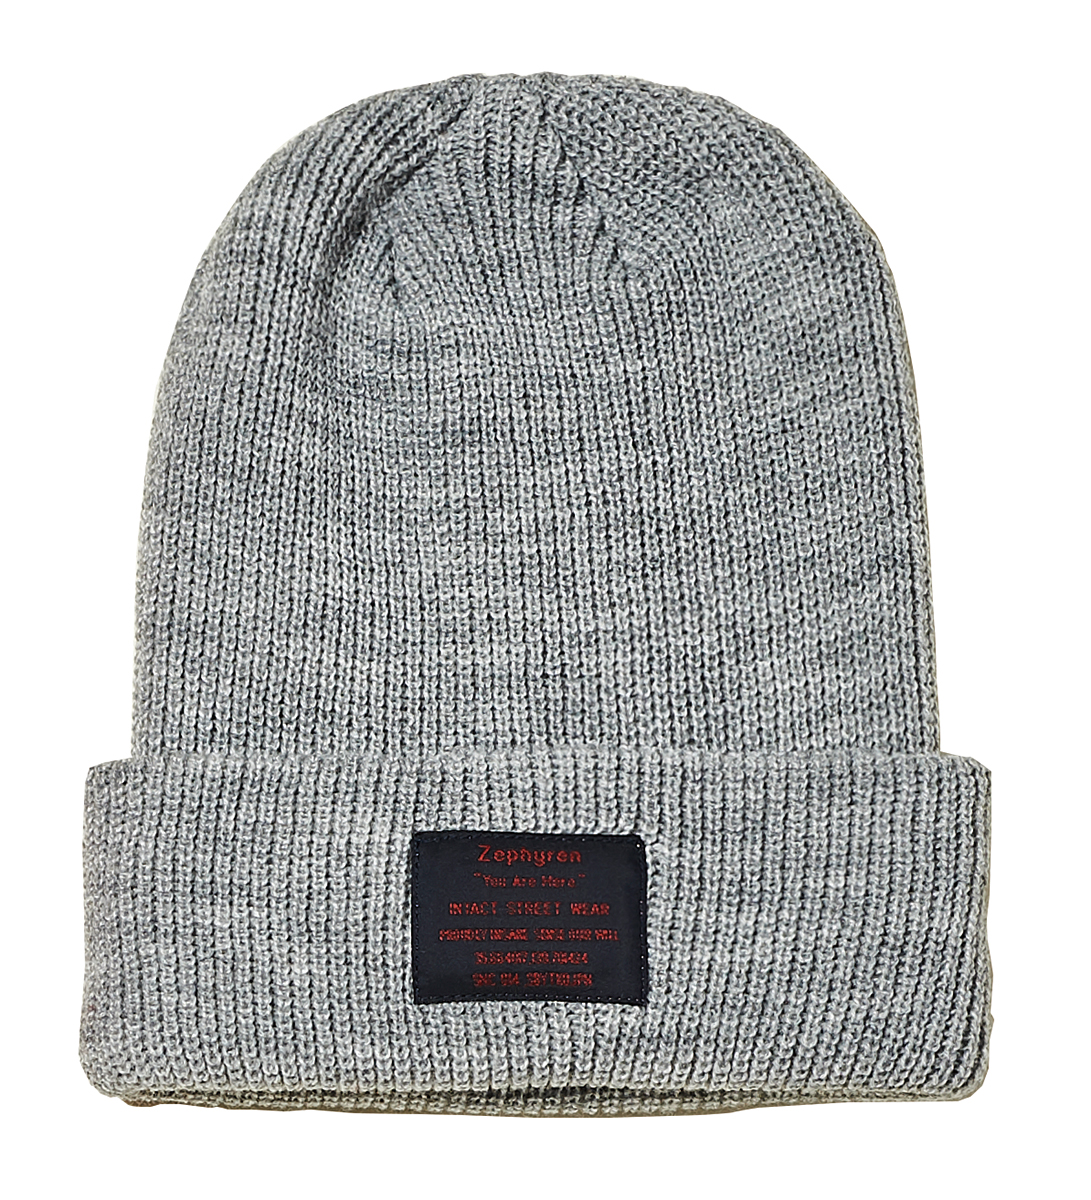 KNIT Beanie -You Are Here GRAY